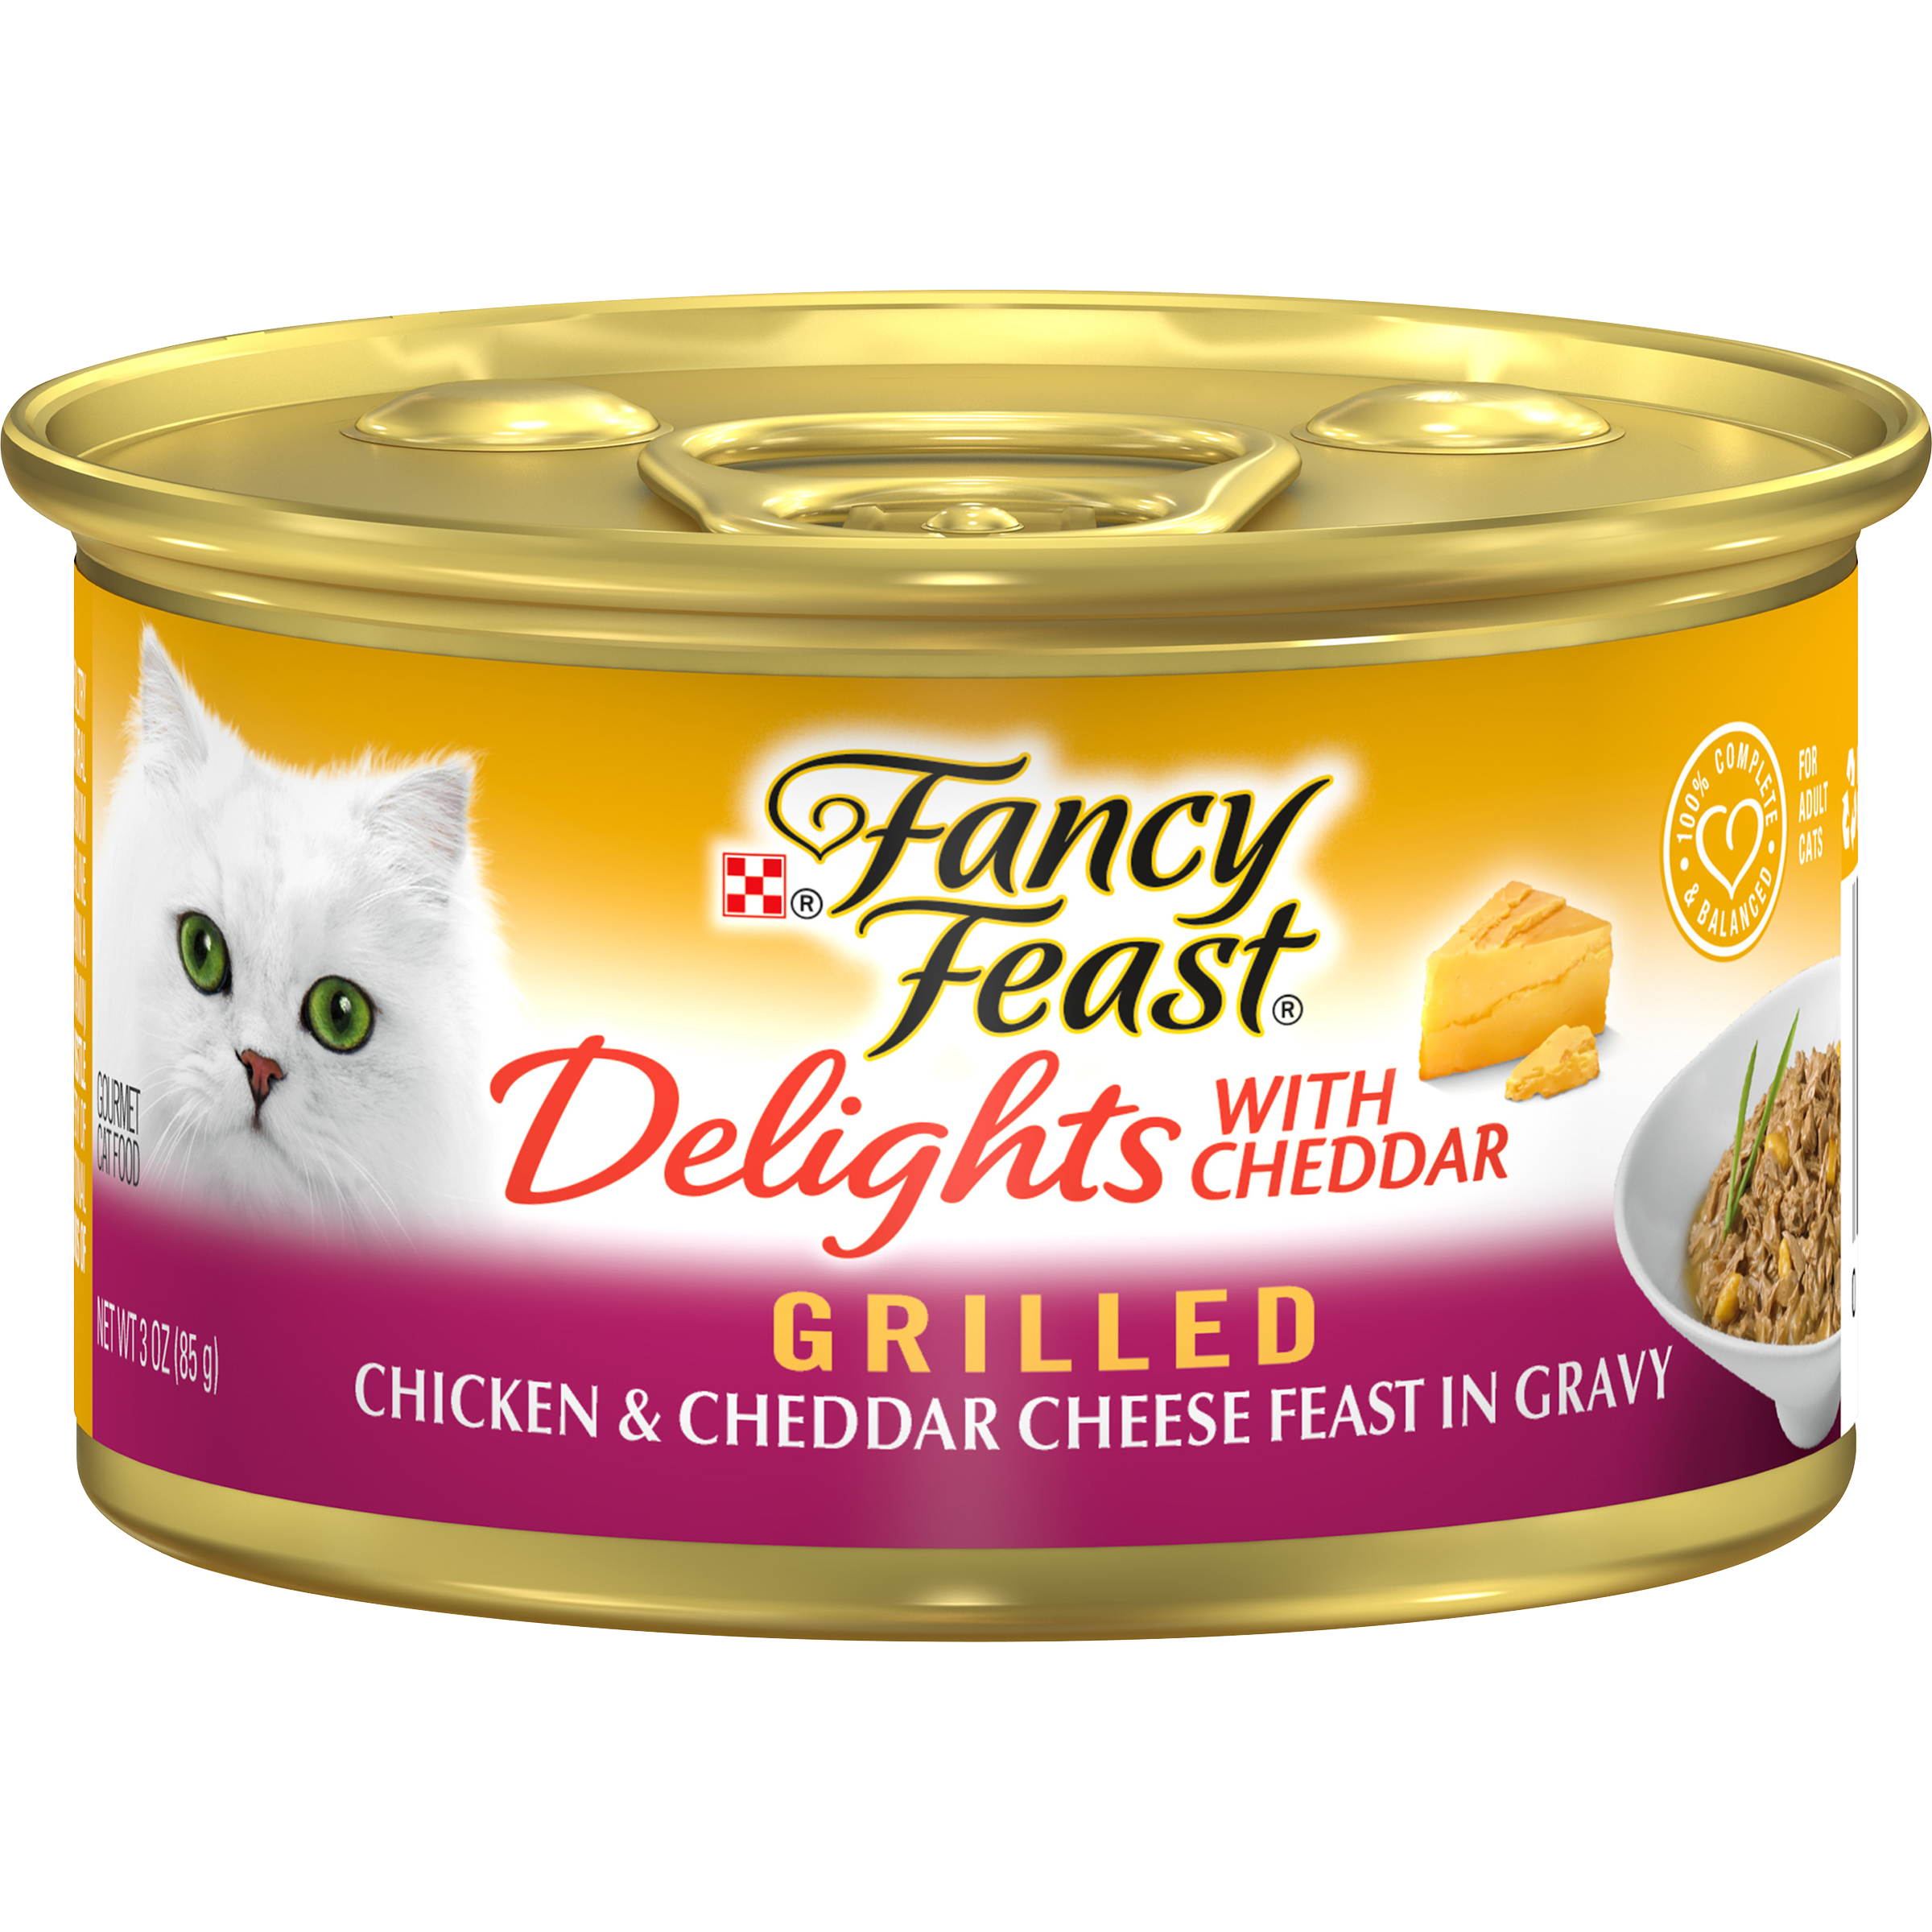 Delights with Cheddar Grilled Chicken & Cheddar Cheese Feast in Gravy (12)